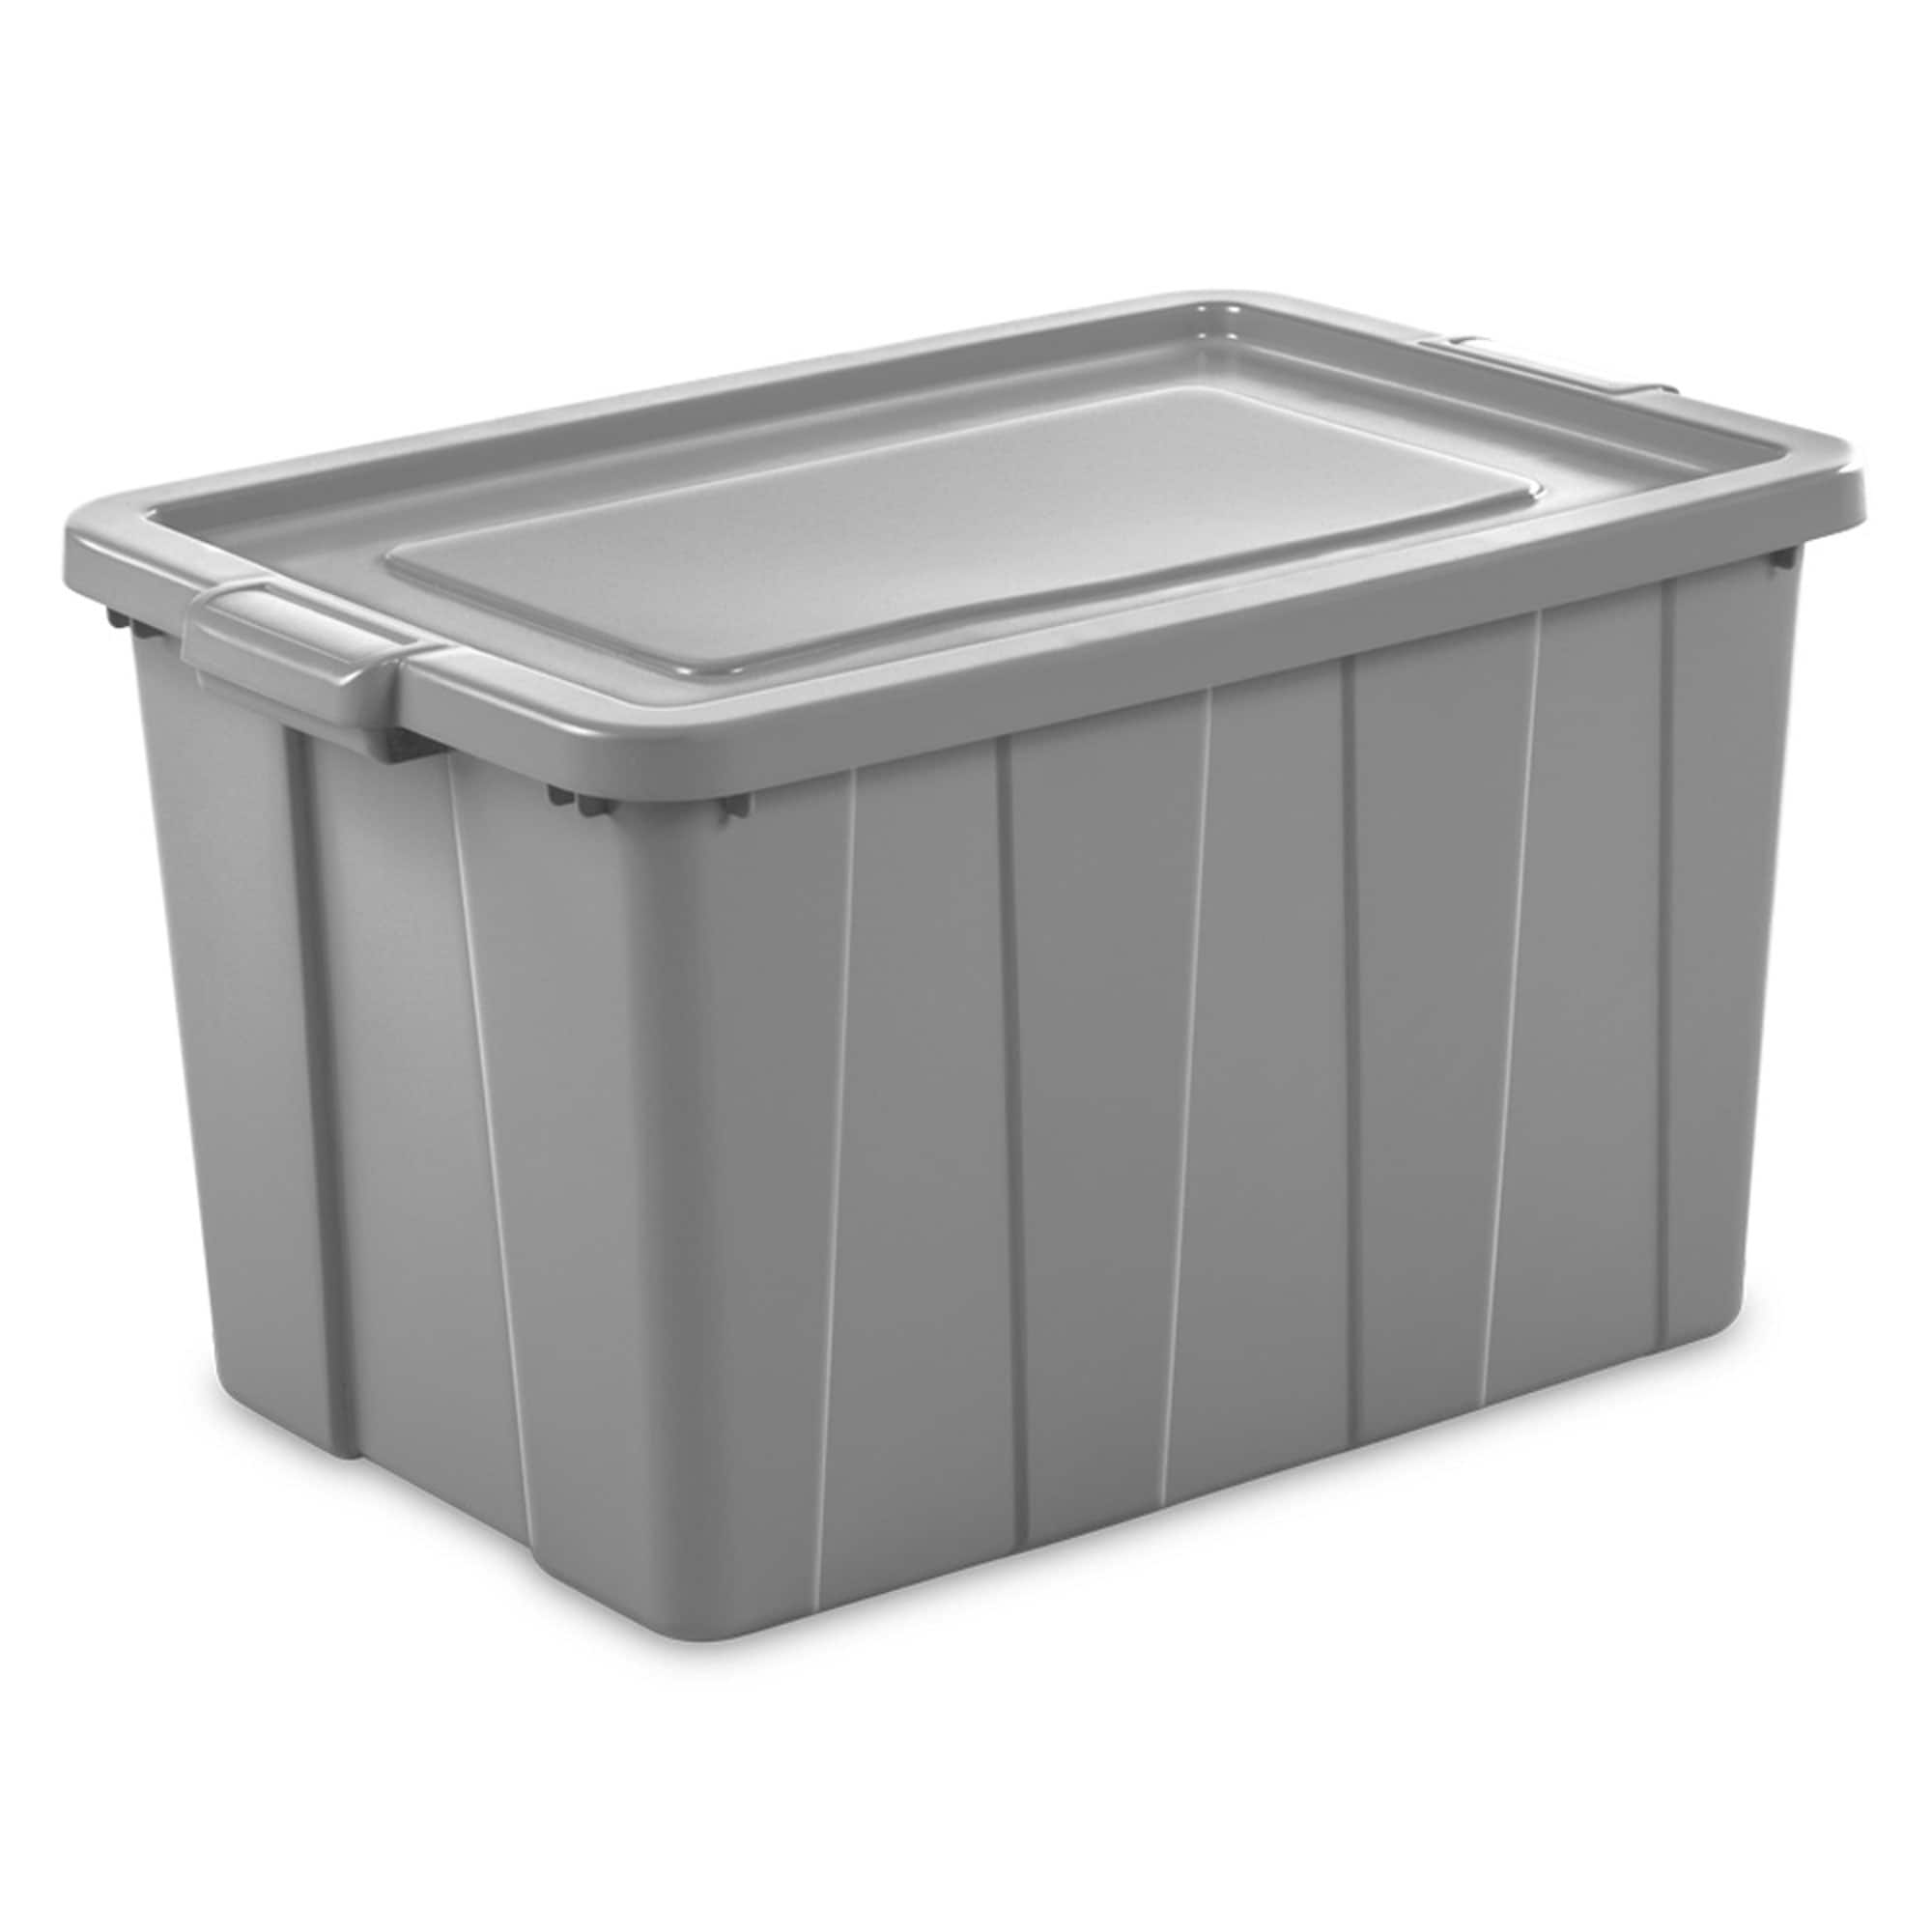 https://ak1.ostkcdn.com/images/products/is/images/direct/5e5df1930ff34fbbda7b0d44dd8fec90d414a524/Sterilite-Tuff1-30-Gallon-Plastic-Storage-Tote-Container-Bin-with-Lid-%2816-Pack%29.jpg